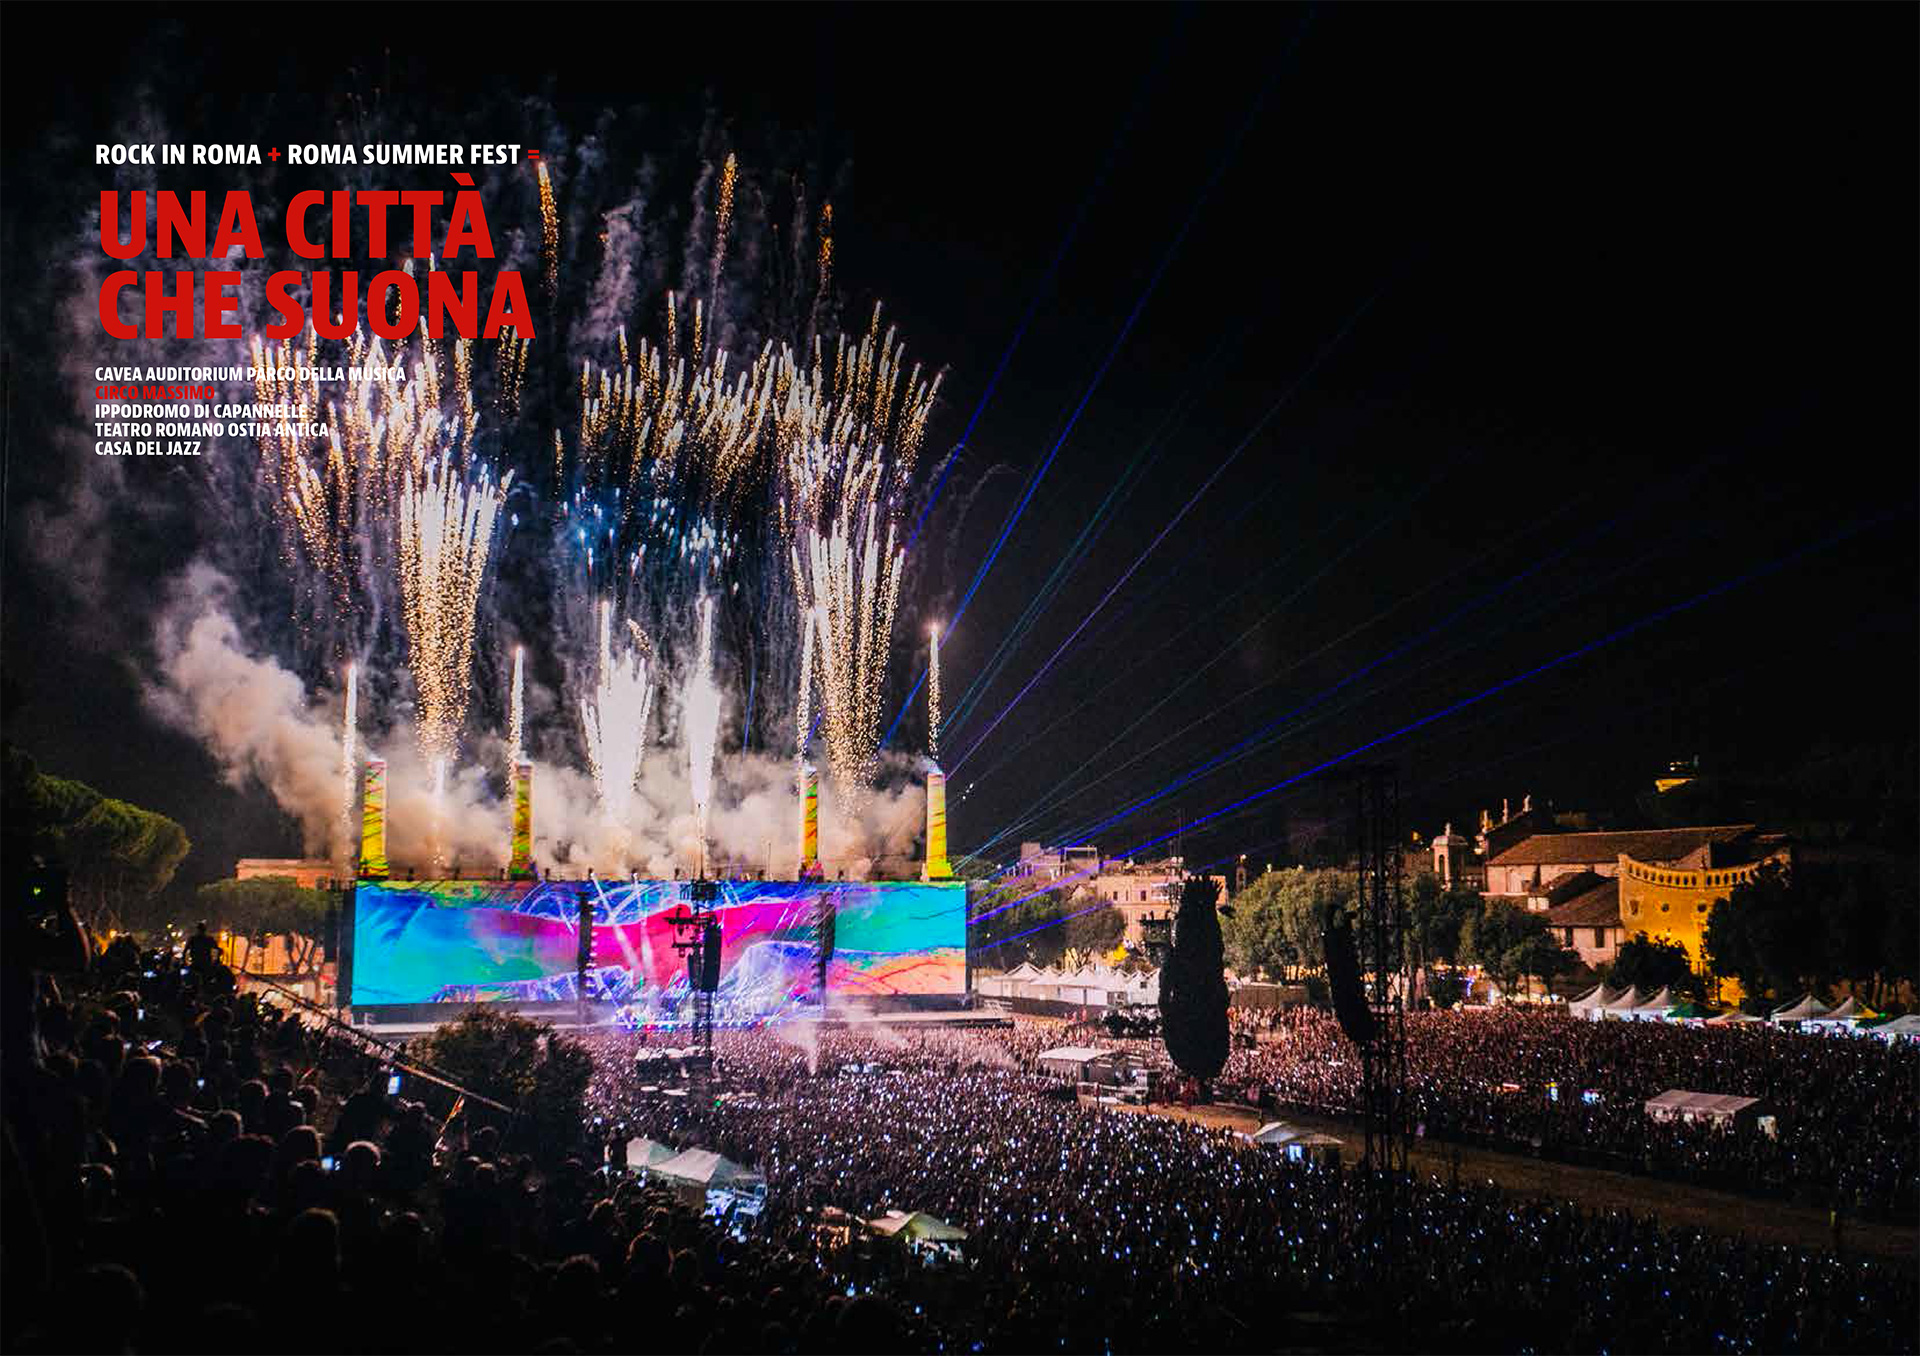 NEW ROCK FESTIVAL IN ROME SUMMER FEST, A CITY THAT PLAYS Rome Central